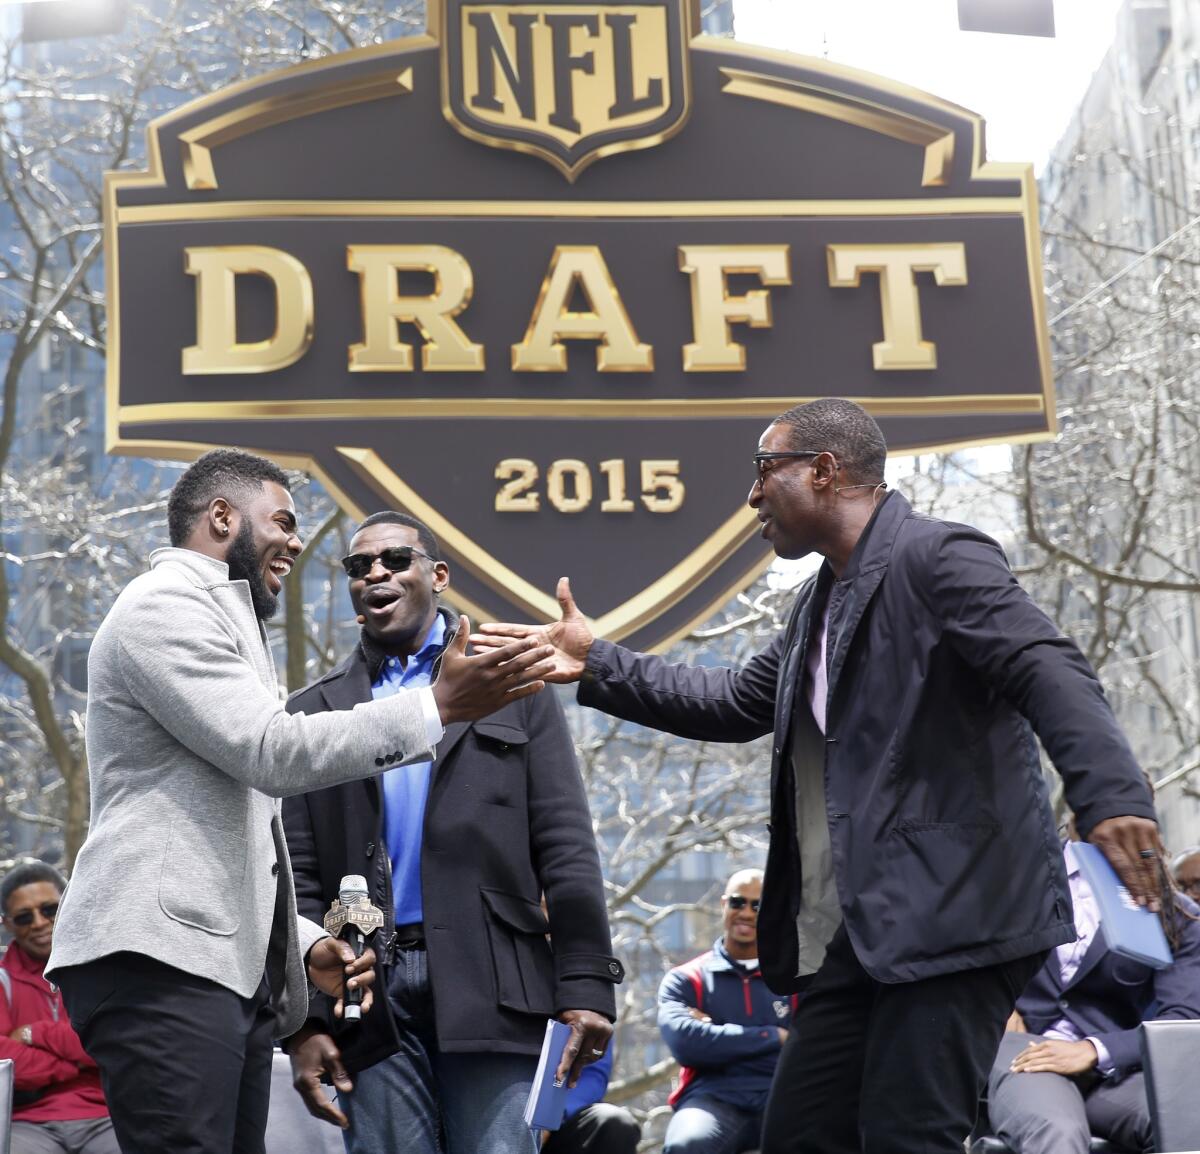 Alabama's Landon Collins, left, is greeted by Michael Irvin, center, and Cris Carter during introductions at a pre-draft event in Chicago on Wednesday. The NFL draft begins Thursday evening.